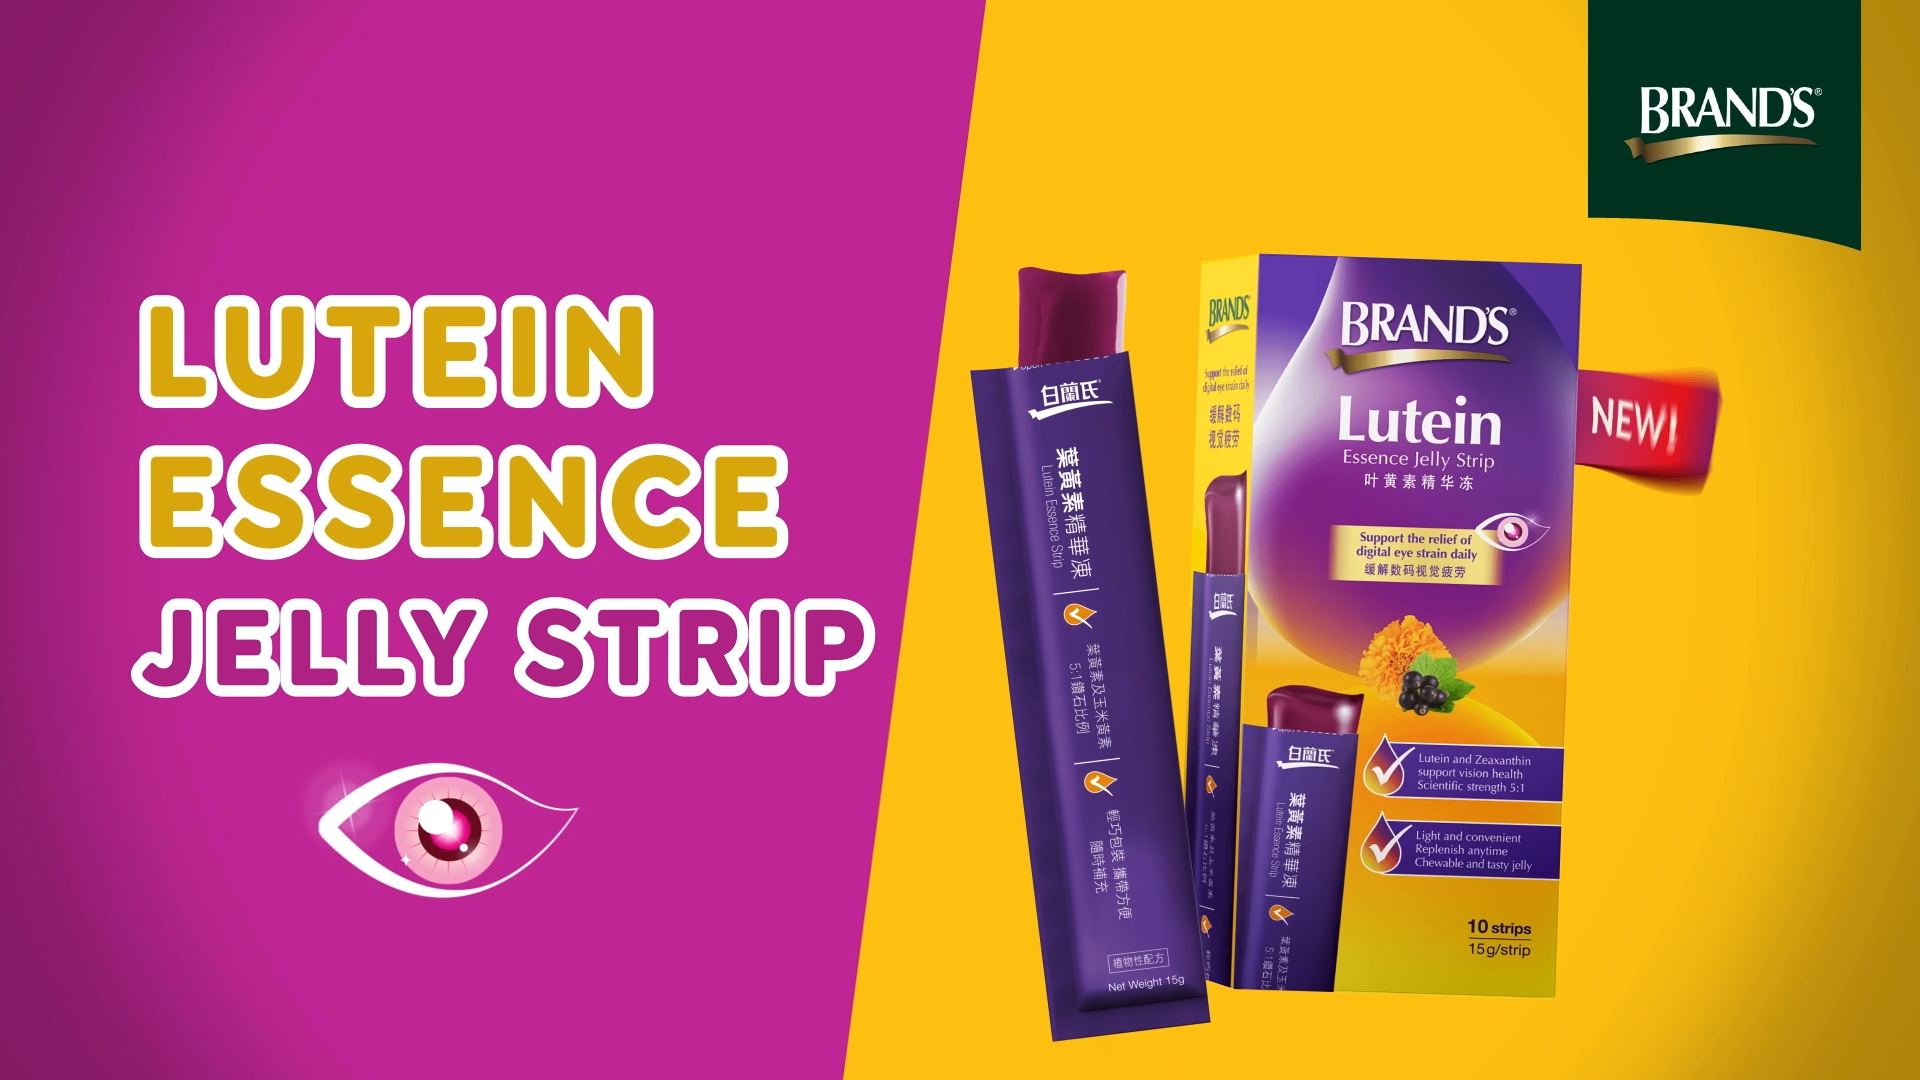 Brand's Lutein Essence Jelly Strips – VisionPal